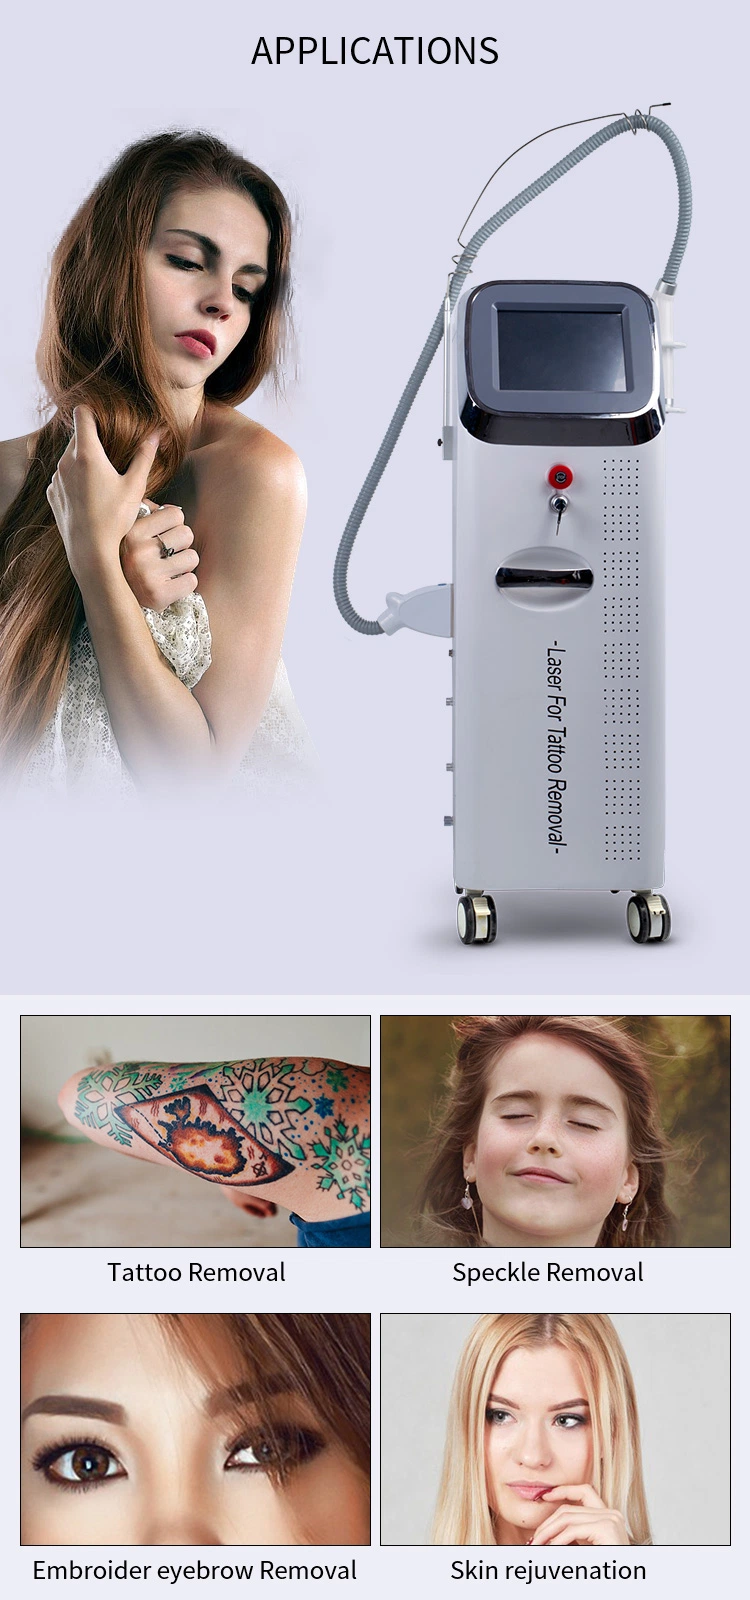 New Style Handheld Carbon Peel Skin Rejuvenation ND YAG Laser Machine for Tattoo Removal Beauty Machine